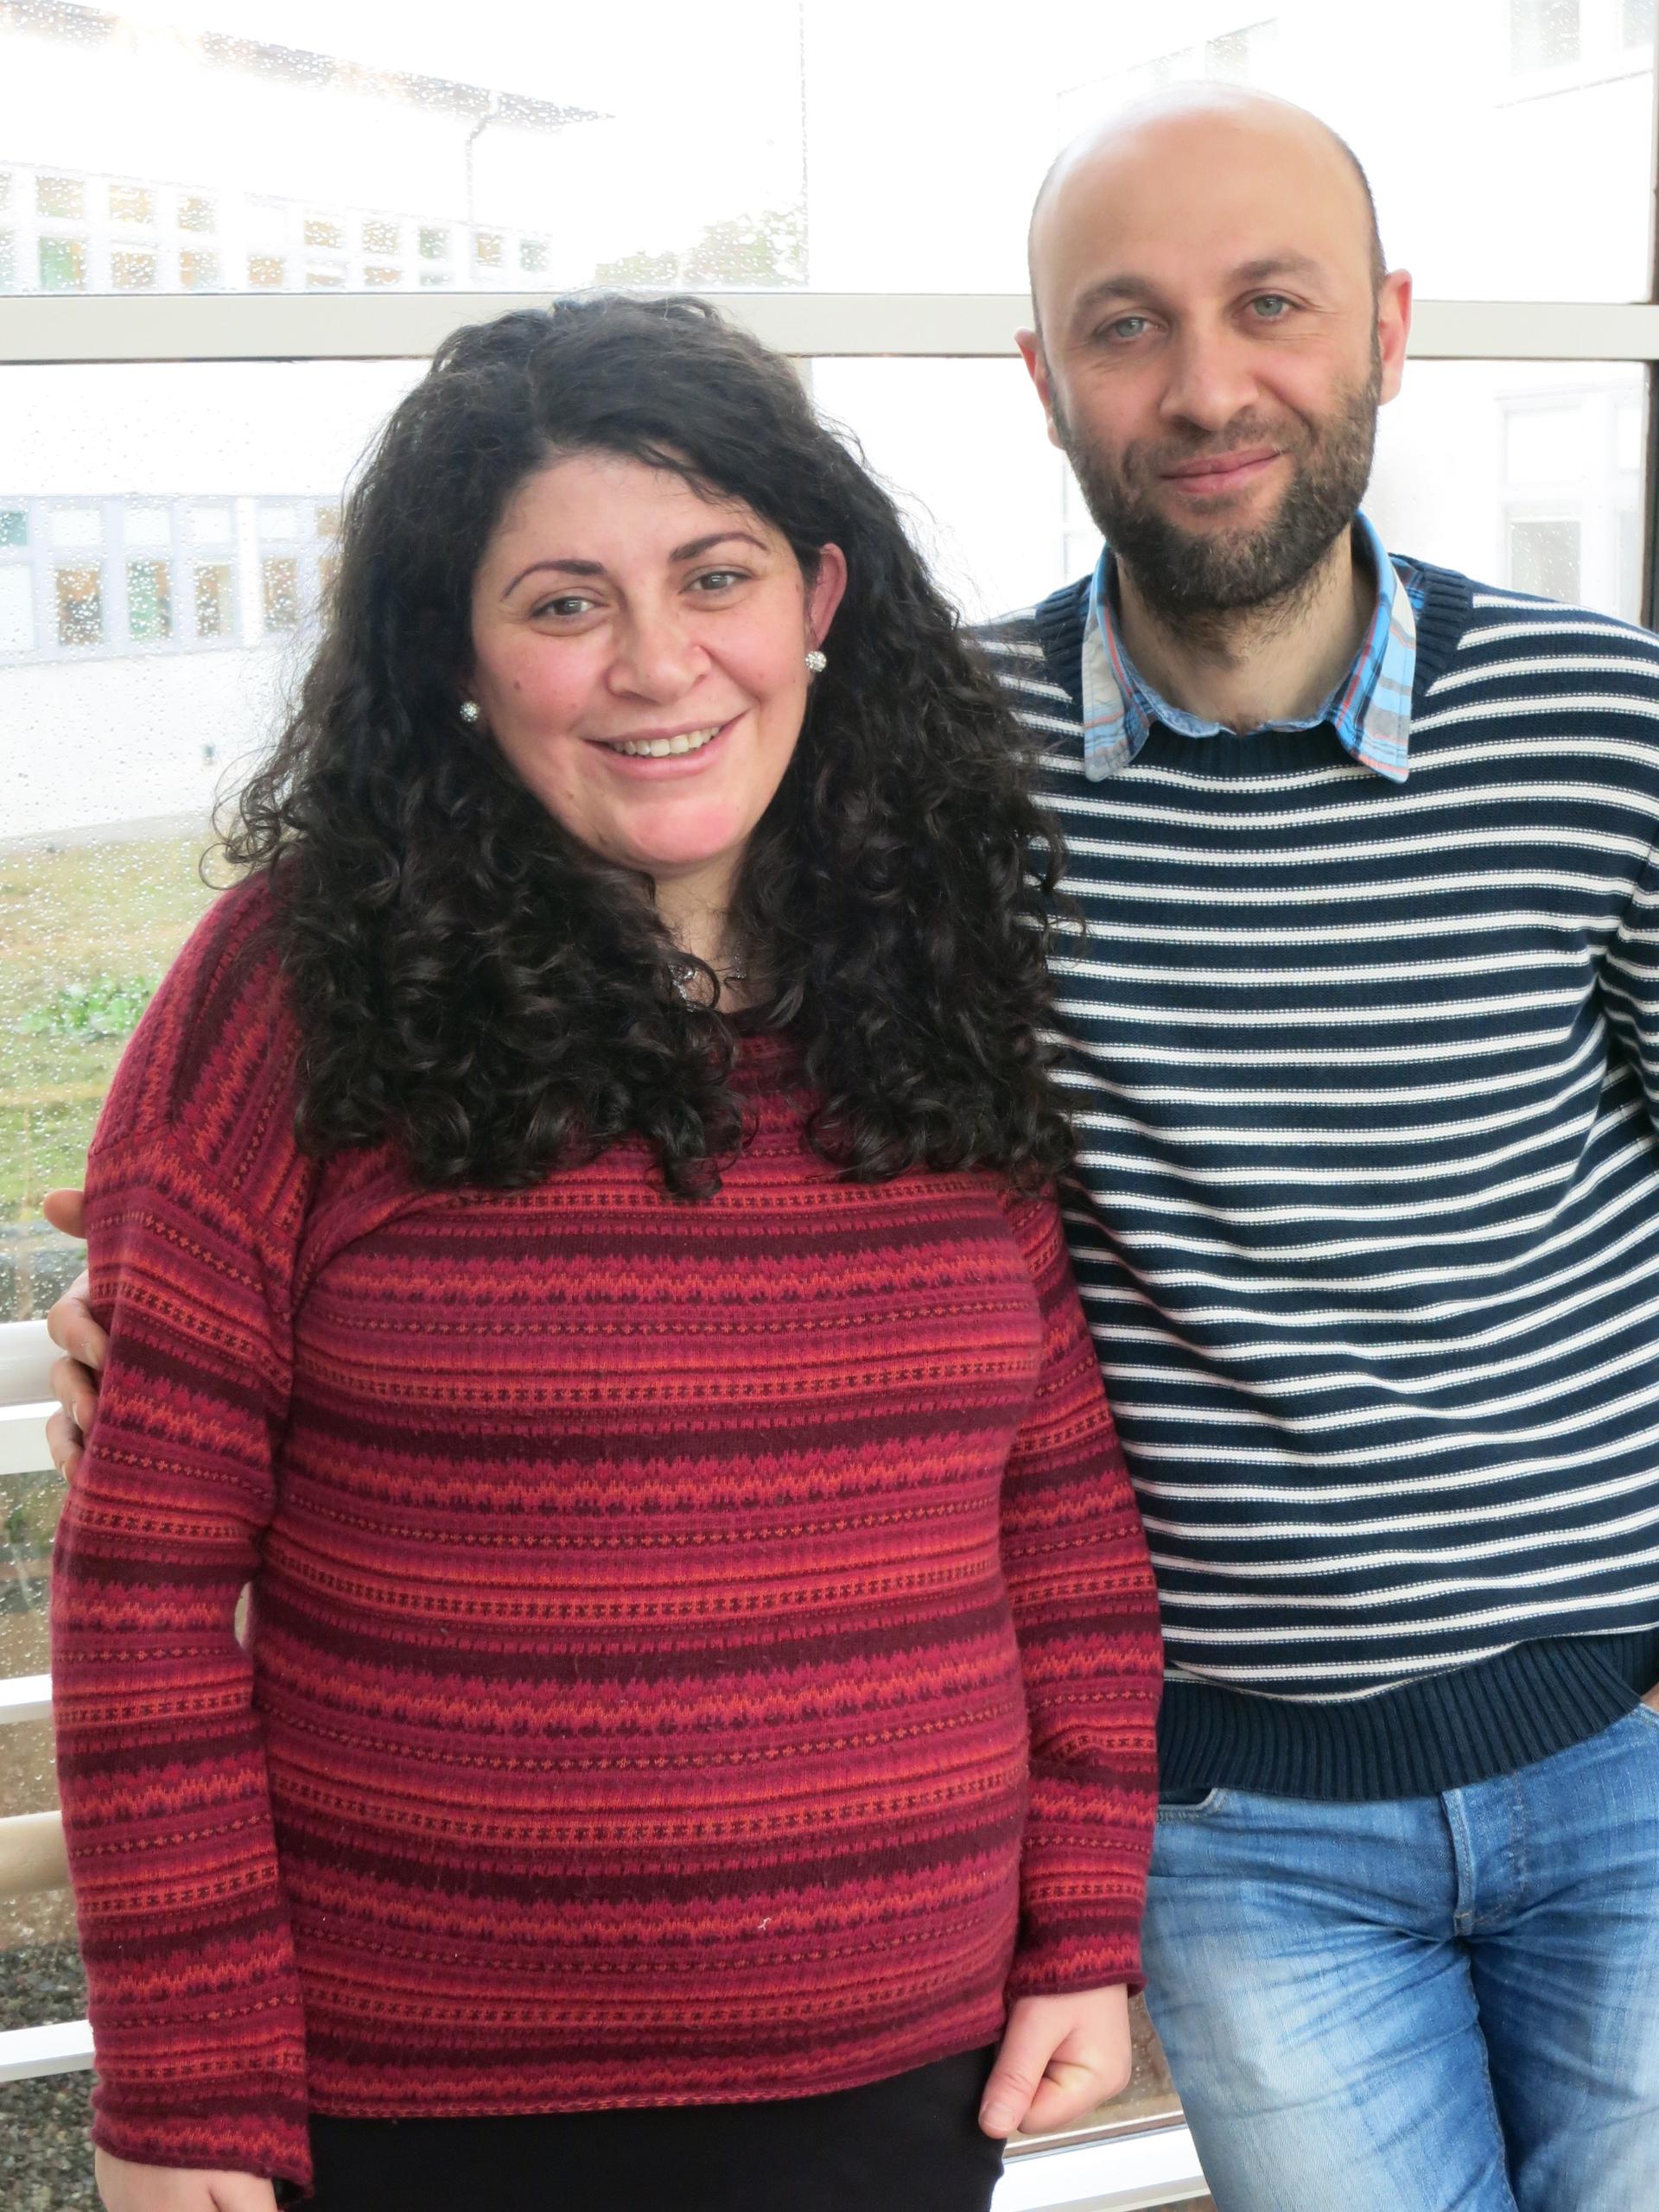 Syrians Charbel and Safa Idrees met in a Swedish language class and are now expecting their first child together.